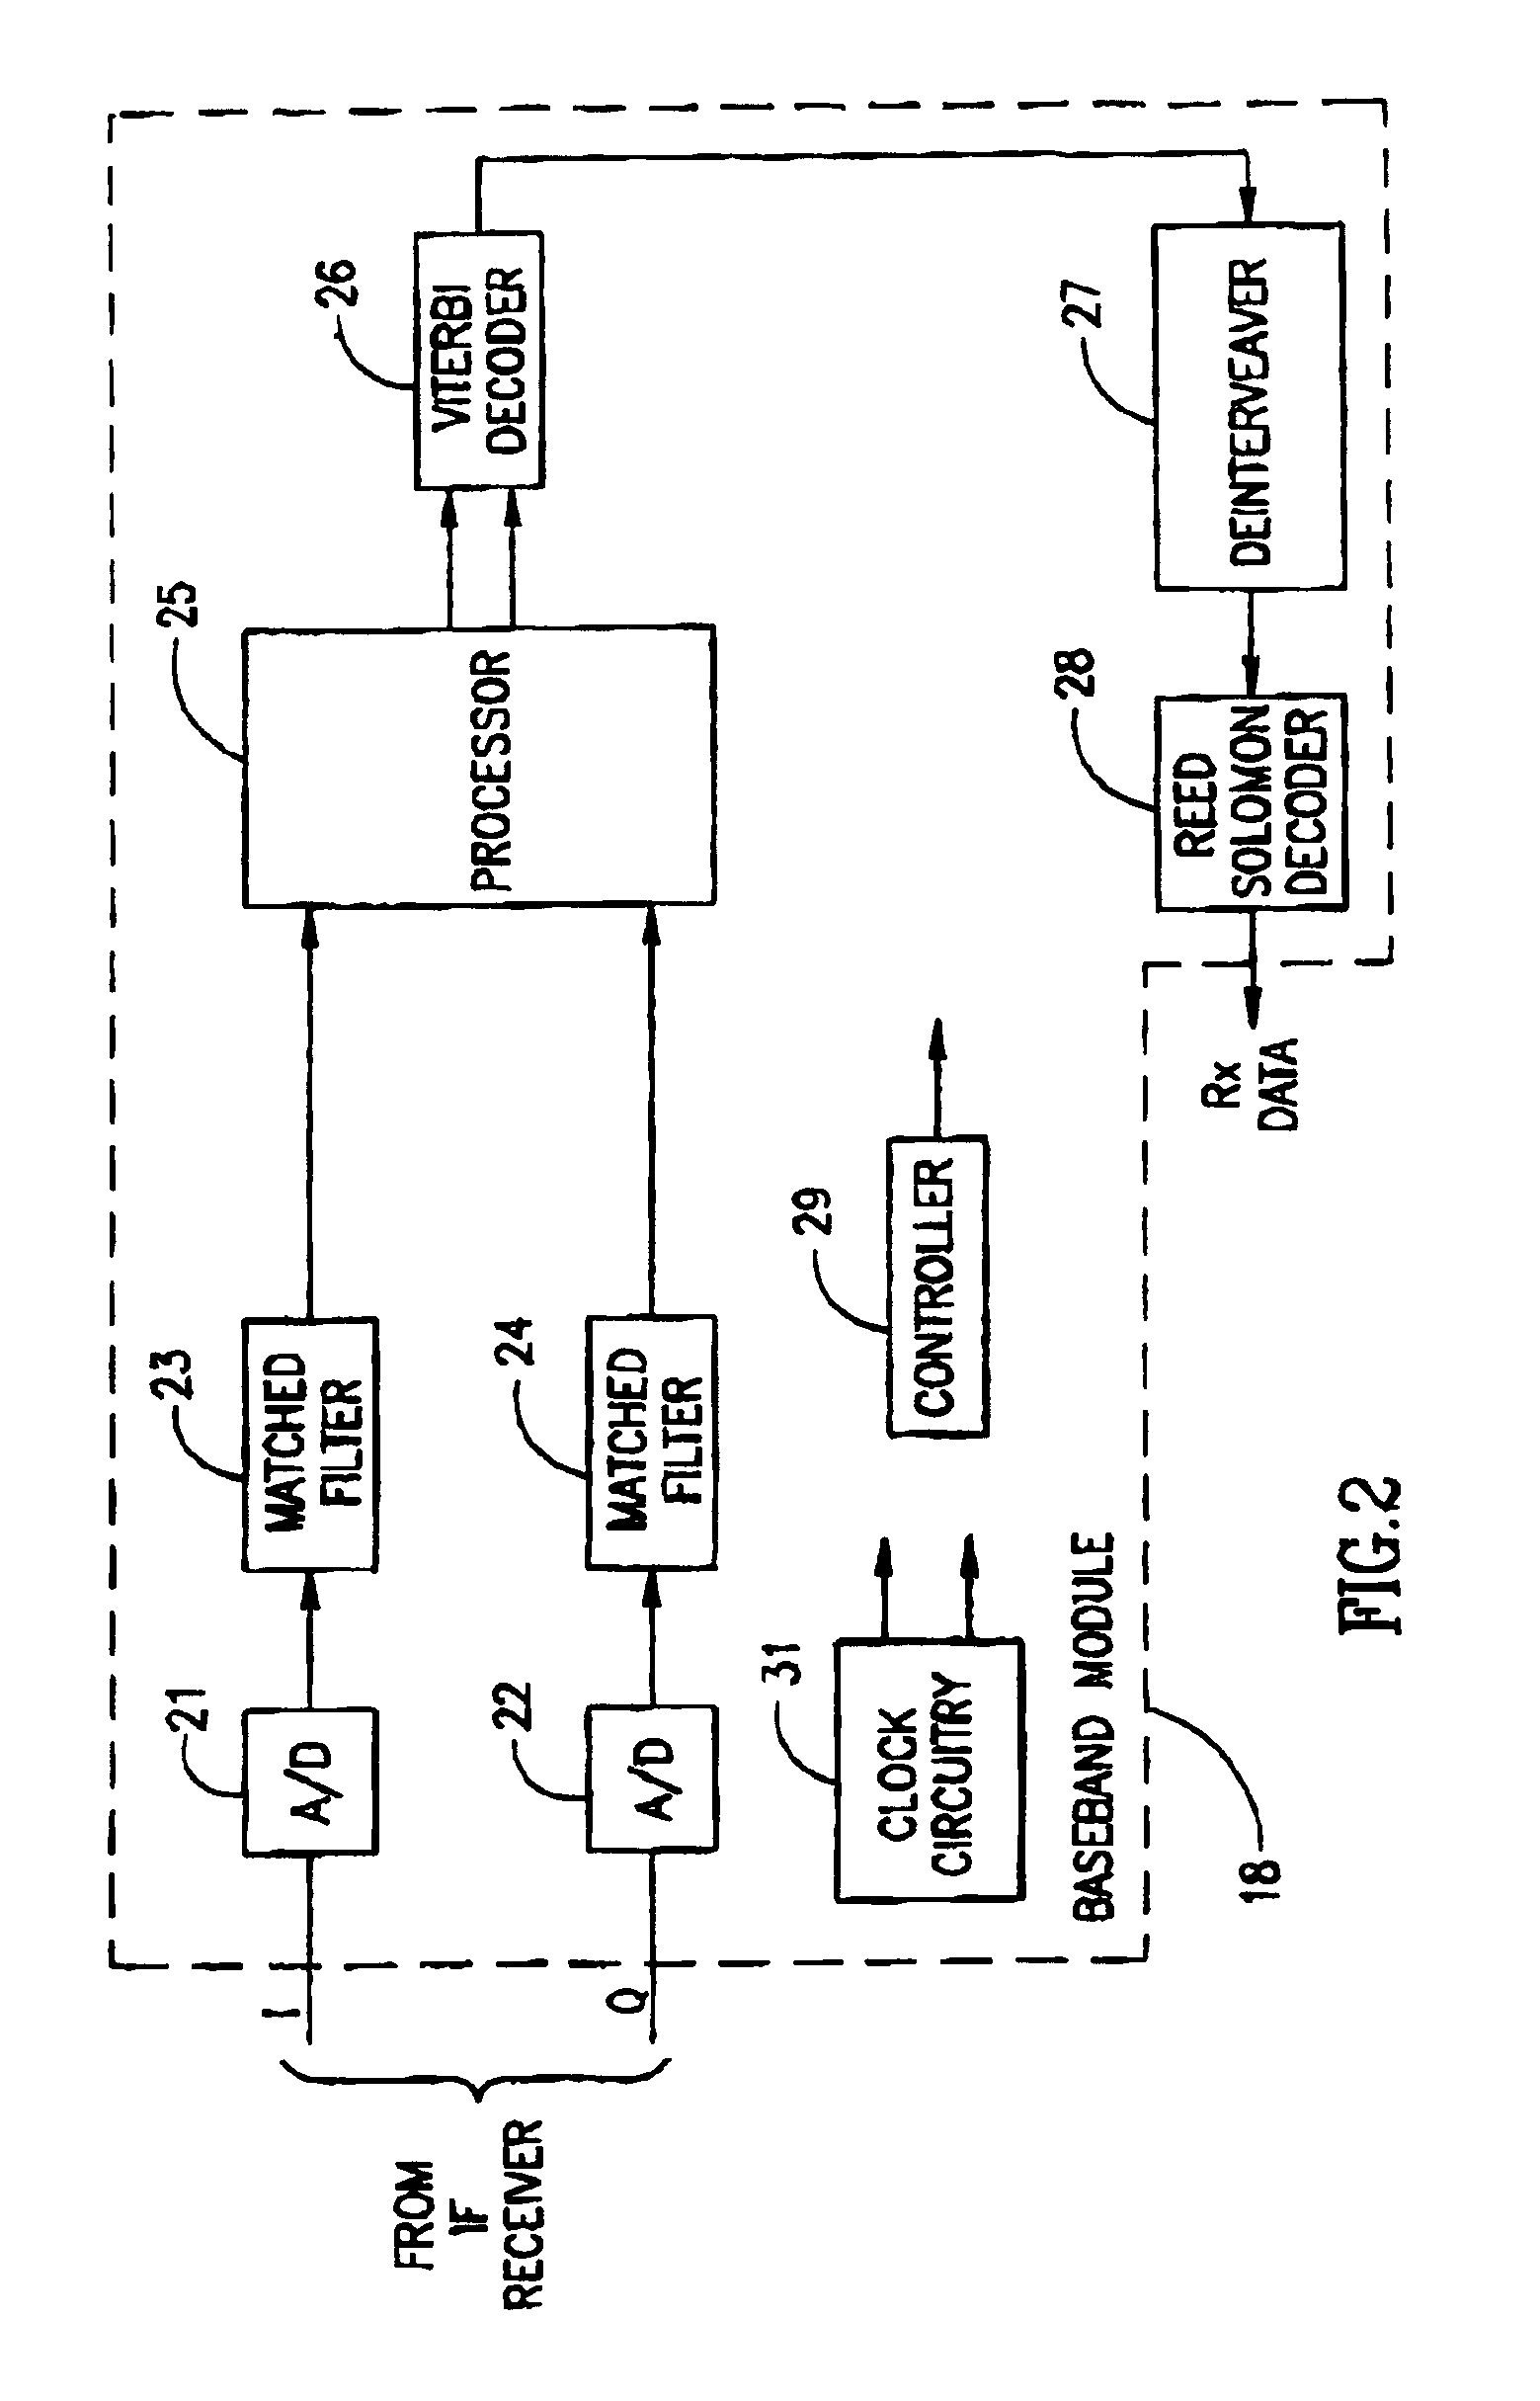 Variable rate continuous mode satellite modem